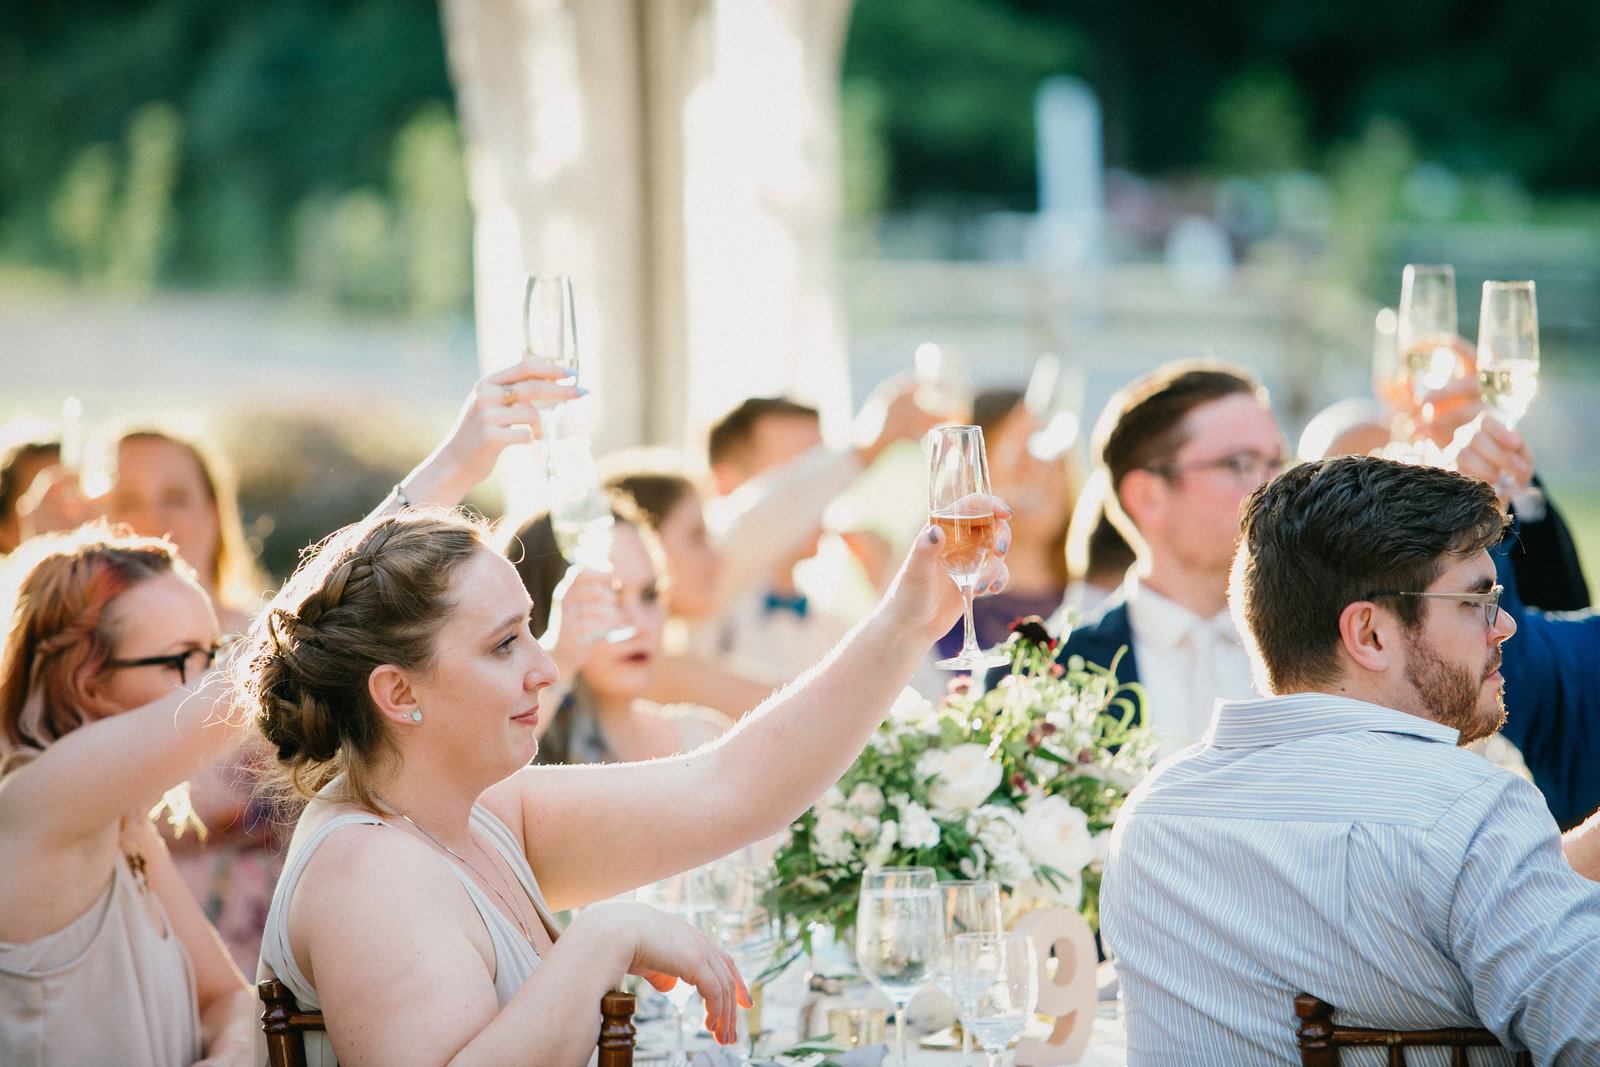 Guests raise up their glasses for a toast to the newly wed couple.